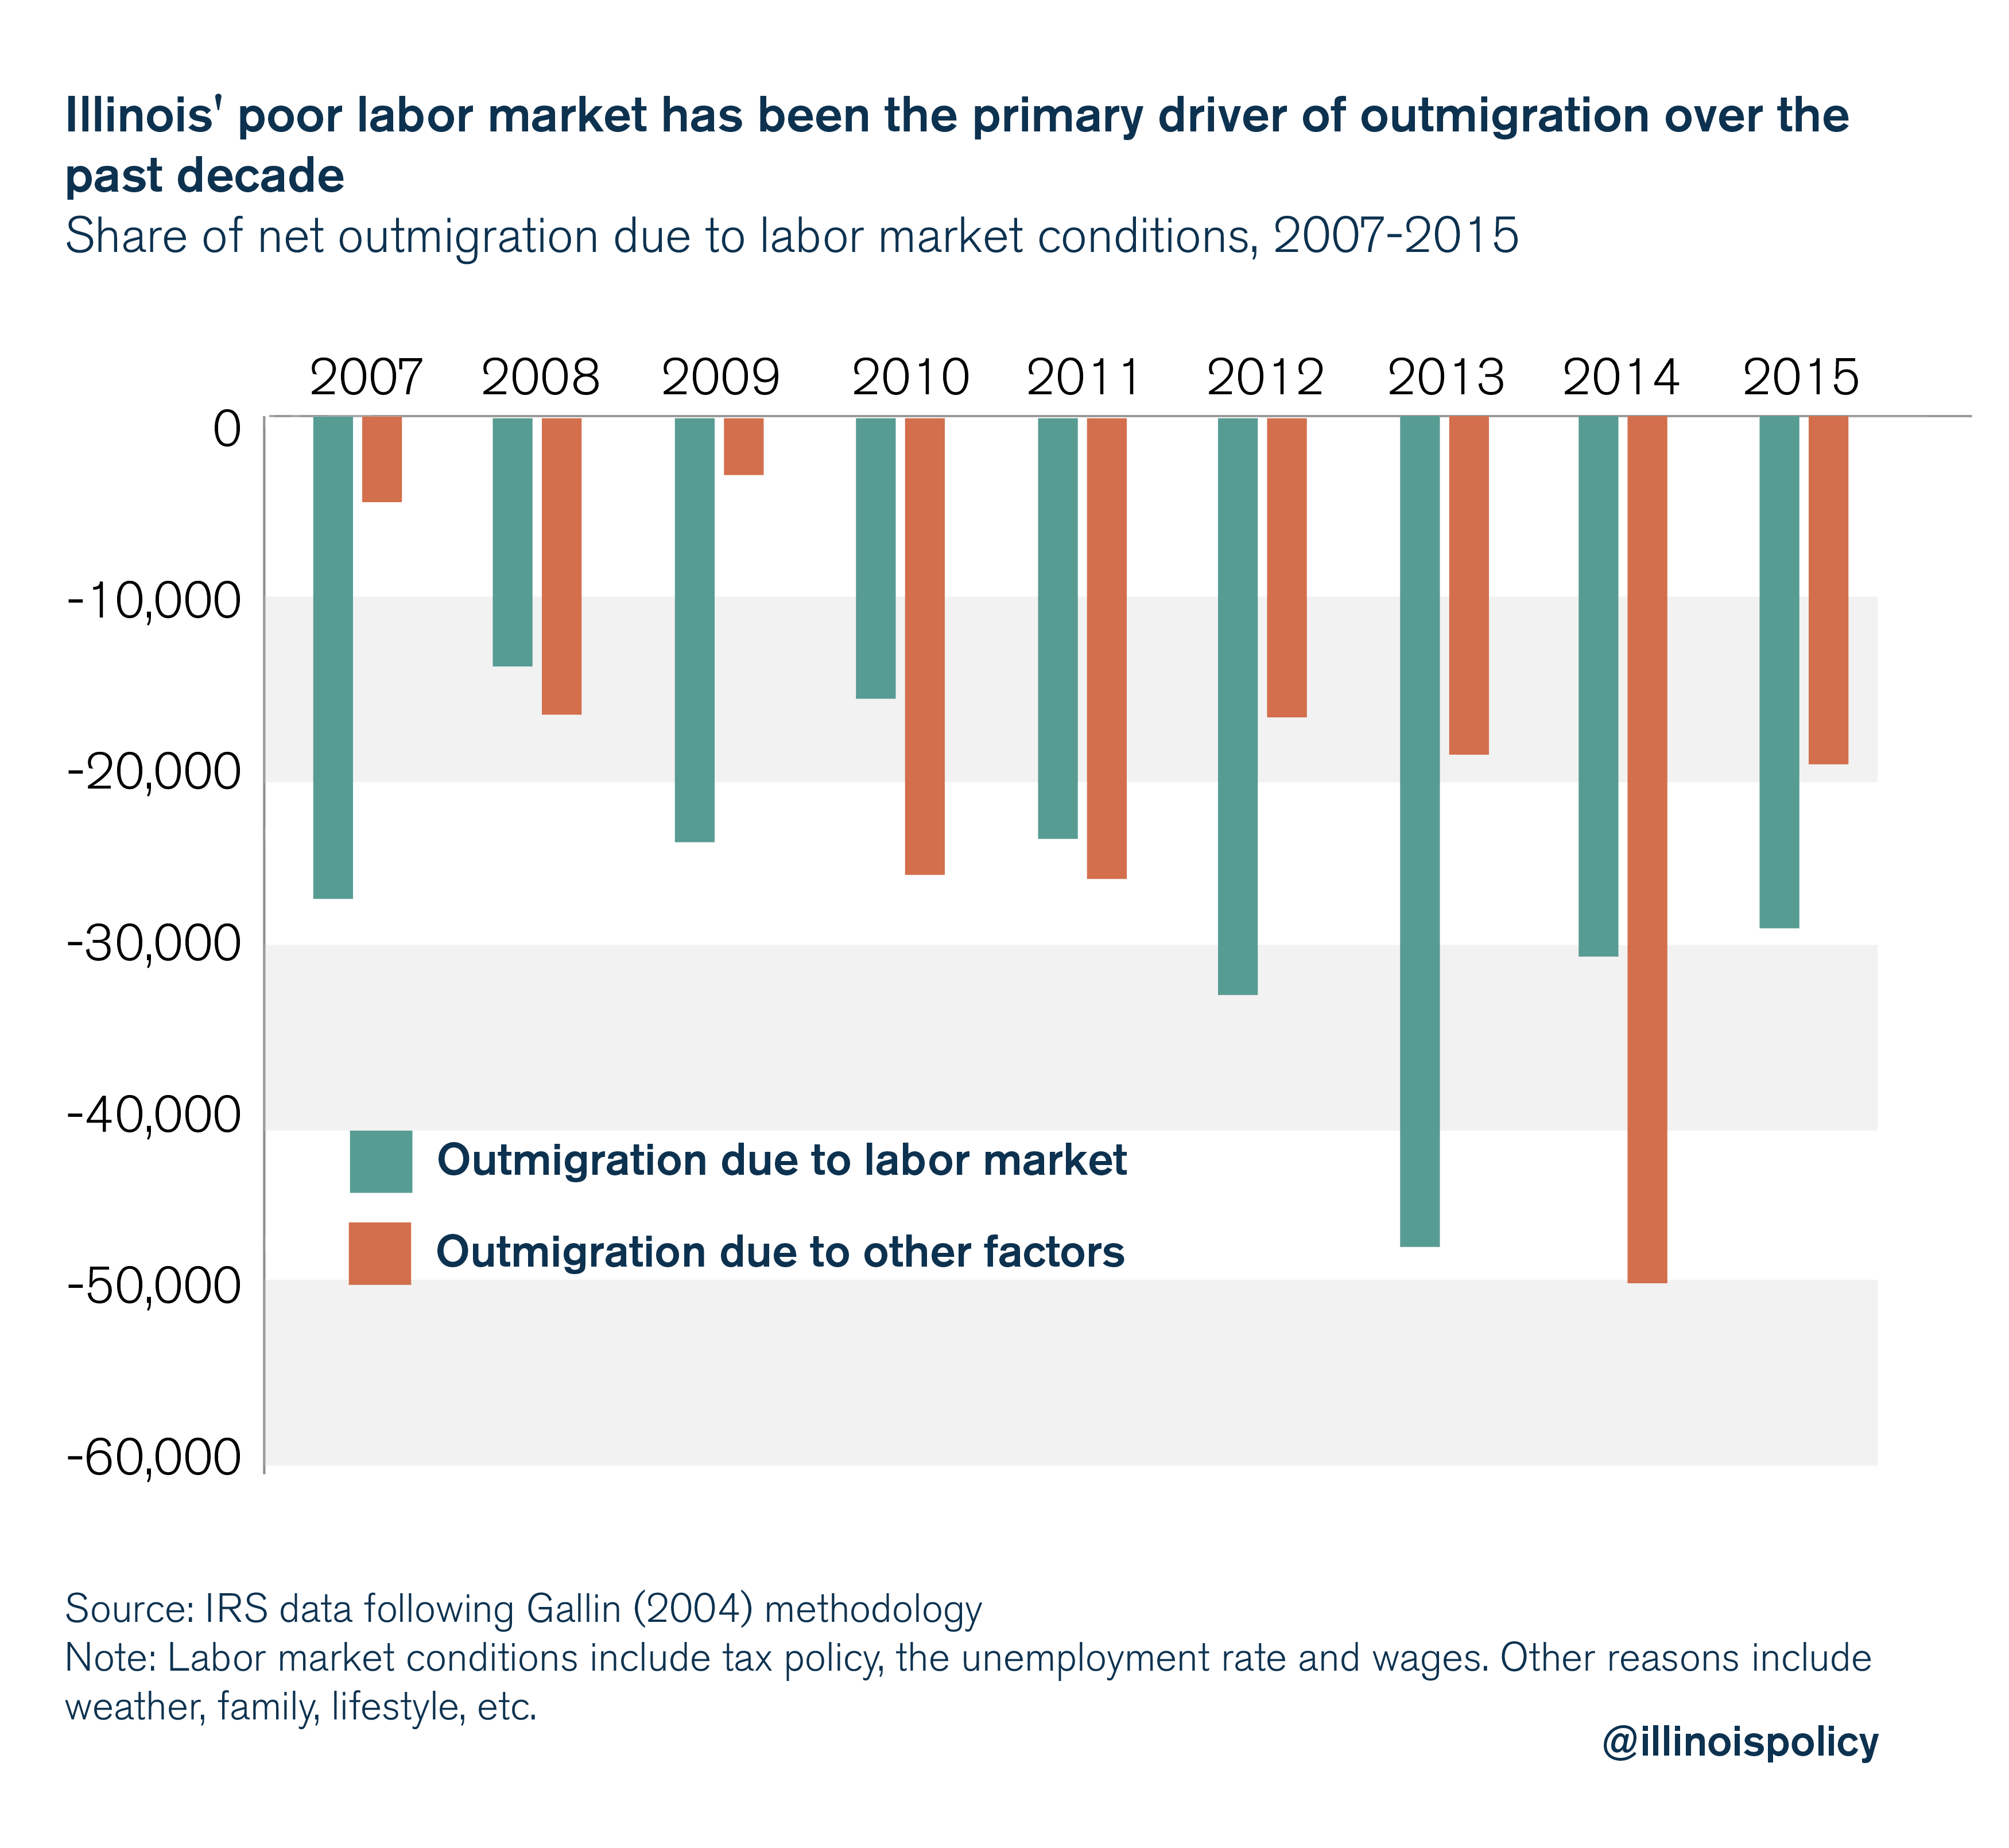 illinois' poor labor market has been the primary driver of outmigration over the past decade